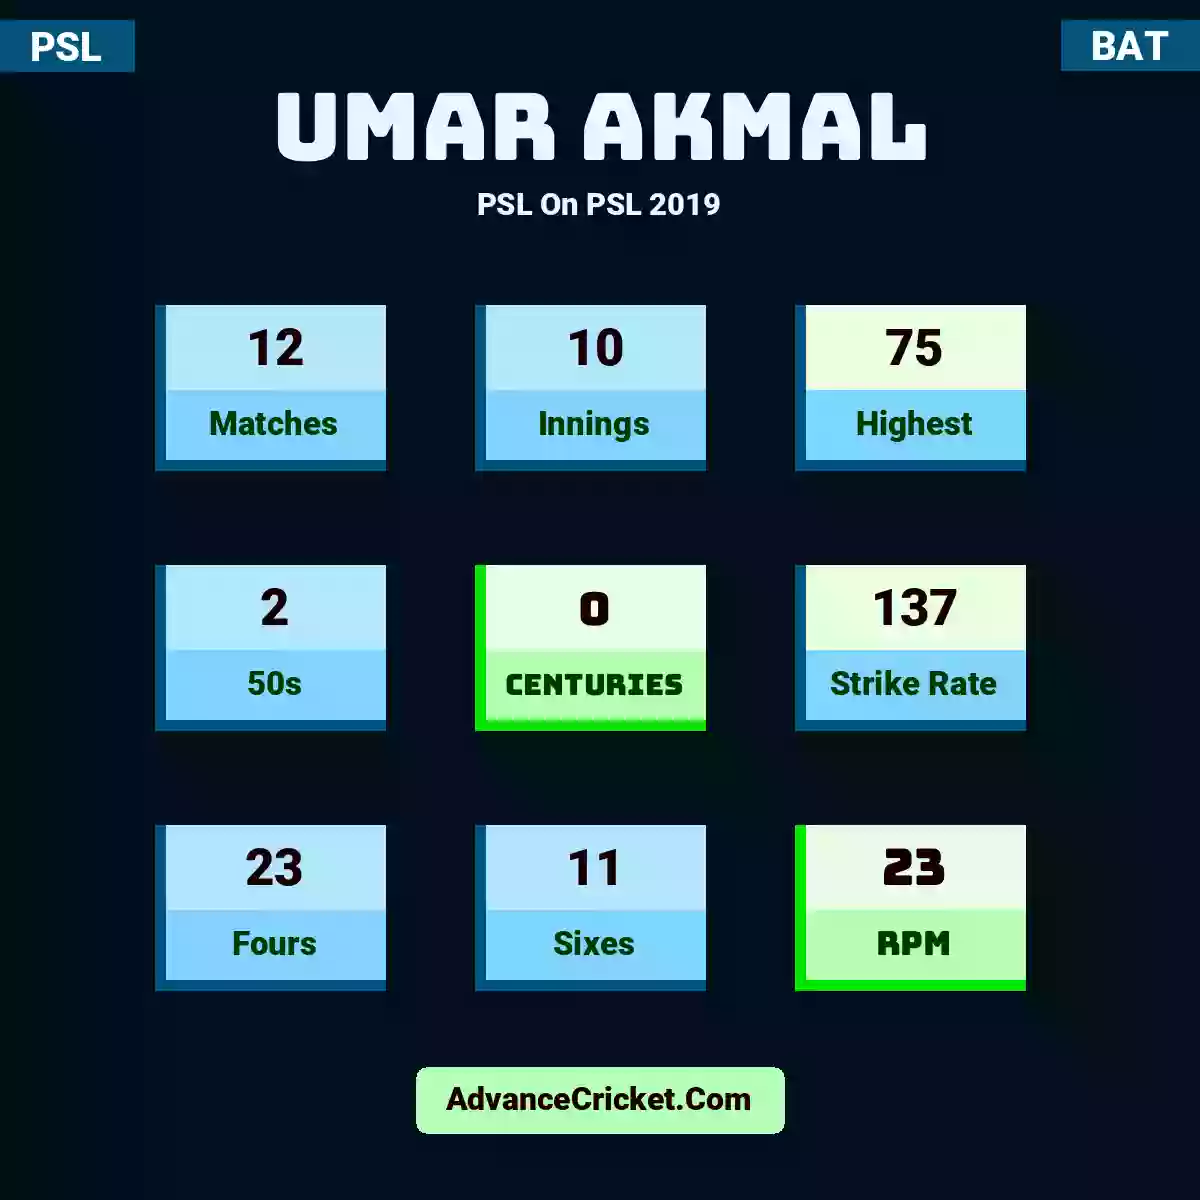 Umar Akmal PSL  On PSL 2019, Umar Akmal played 12 matches, scored 75 runs as highest, 2 half-centuries, and 0 centuries, with a strike rate of 137. U.Akmal hit 23 fours and 11 sixes, with an RPM of 23.